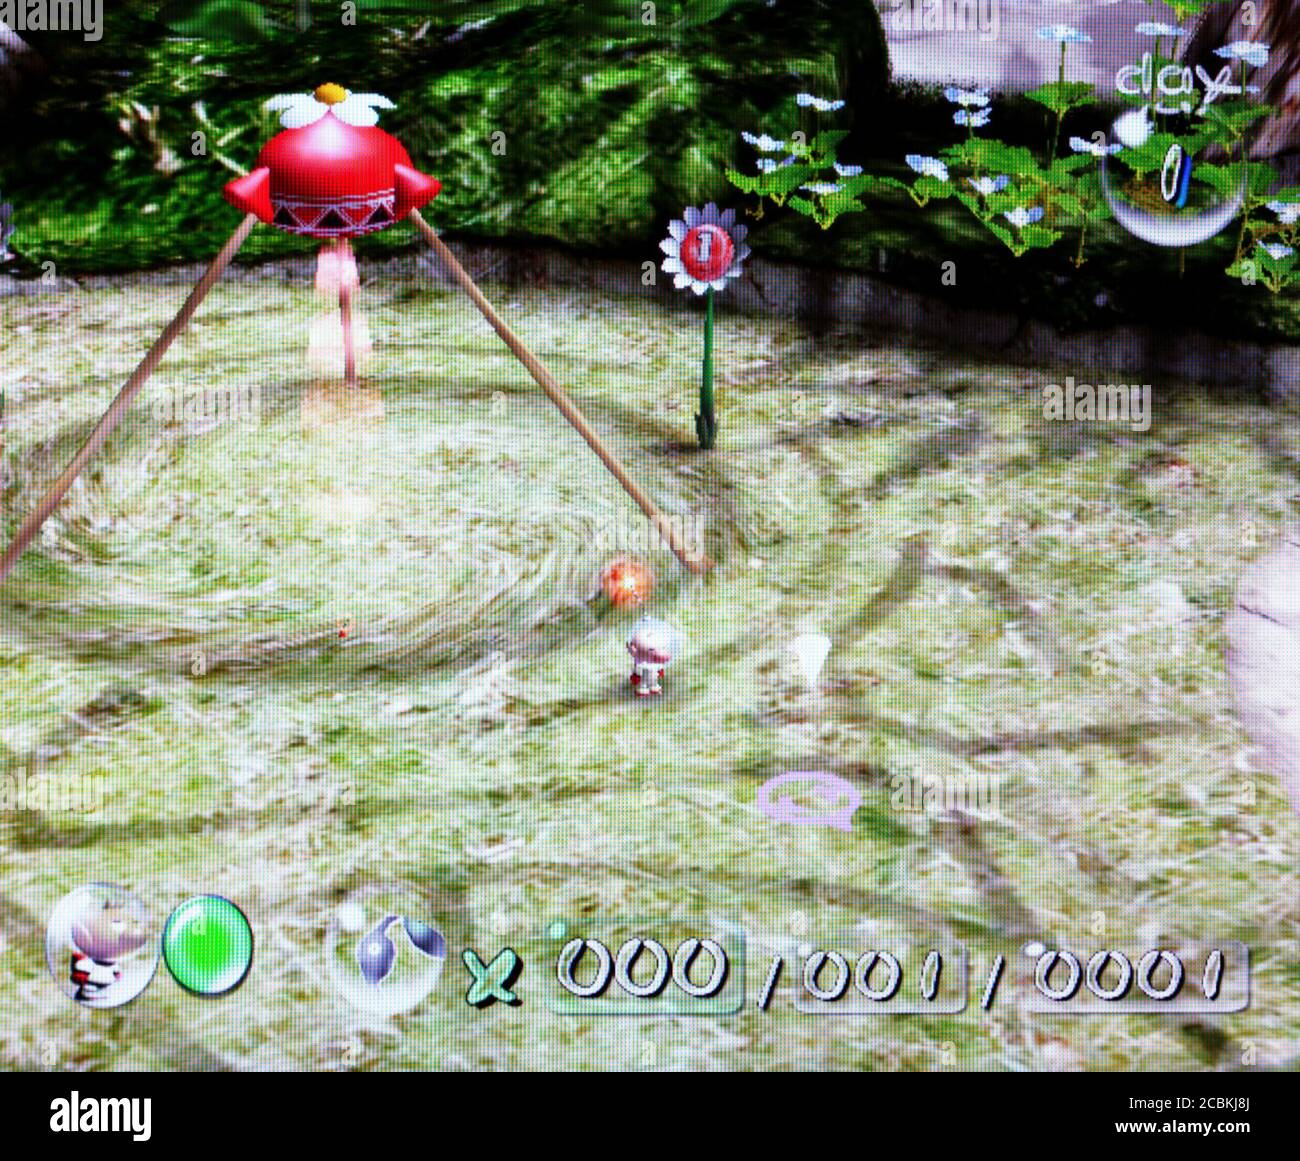 Pikmin - Nintendo Gamecube Videogame - Editorial use only Stock Photo